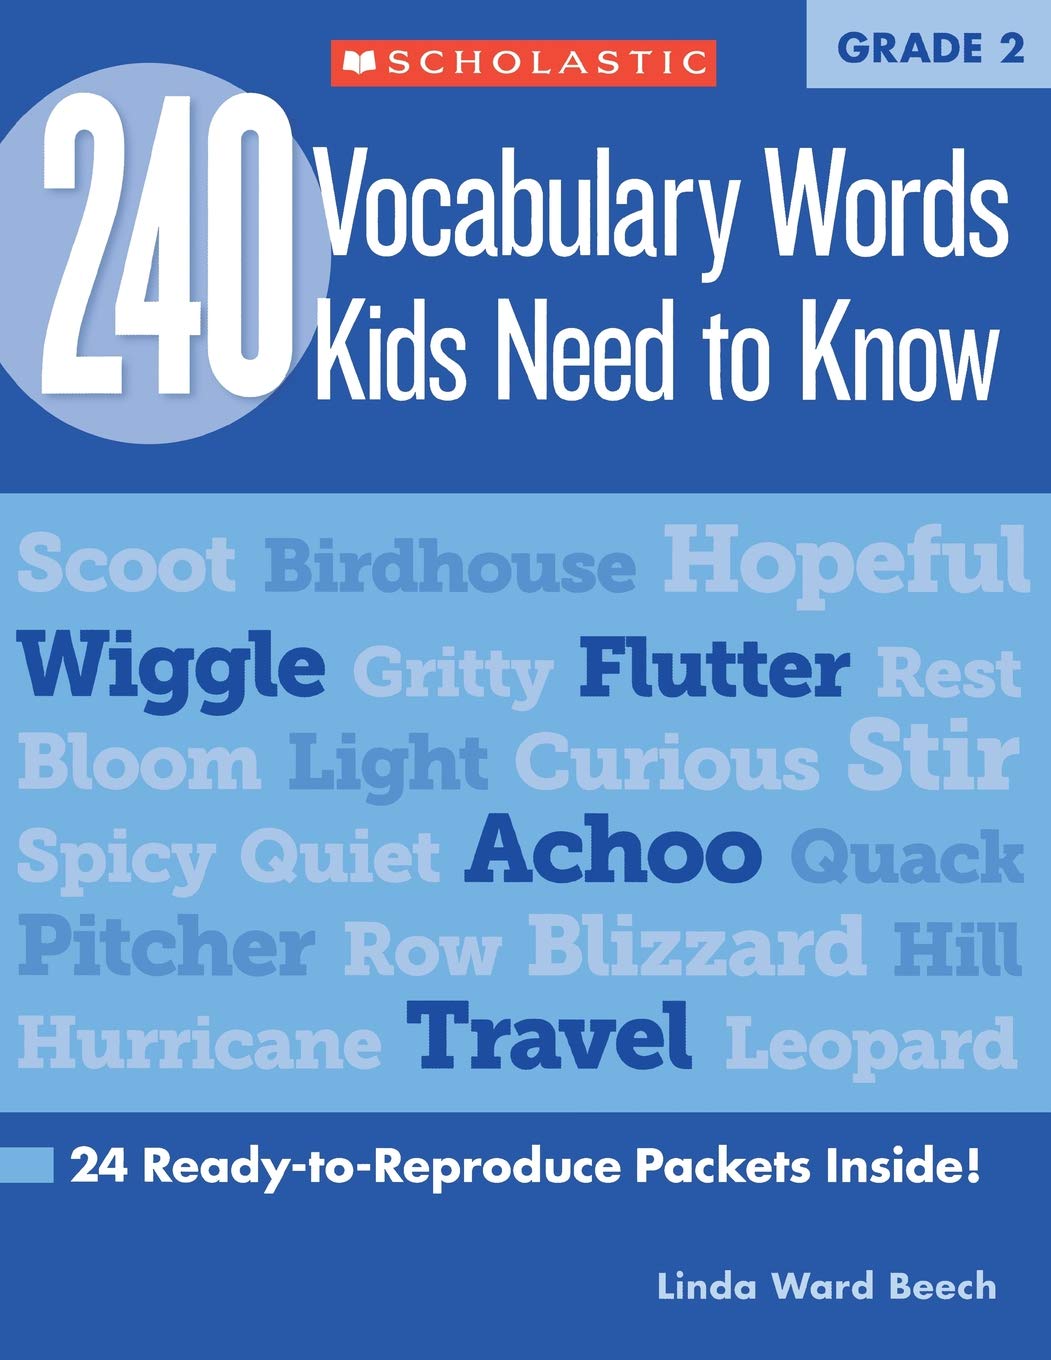 Scholastic Book - 240 Vocabulary Words Kids Need to Know Grade 2